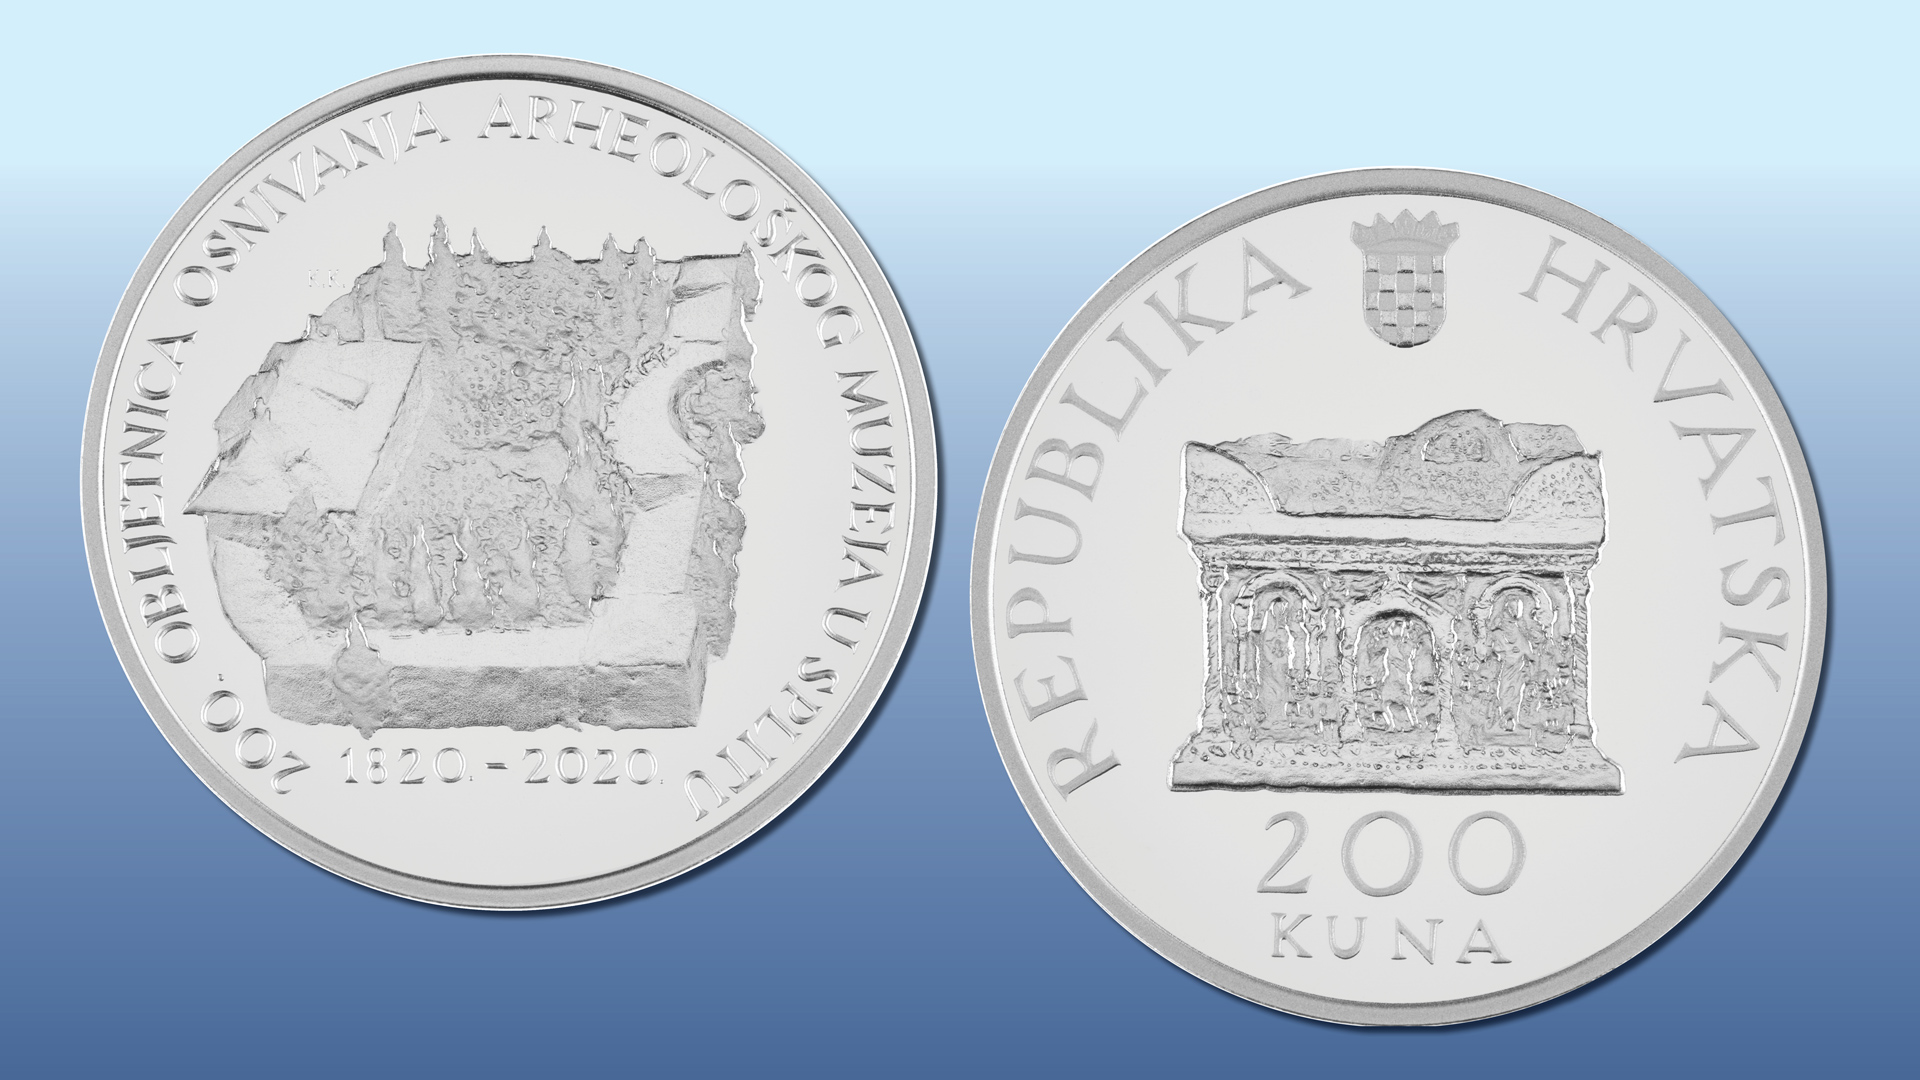 New silver coin issued to mark the 200th anniversary of the founding of the Archaeological Museum in Split